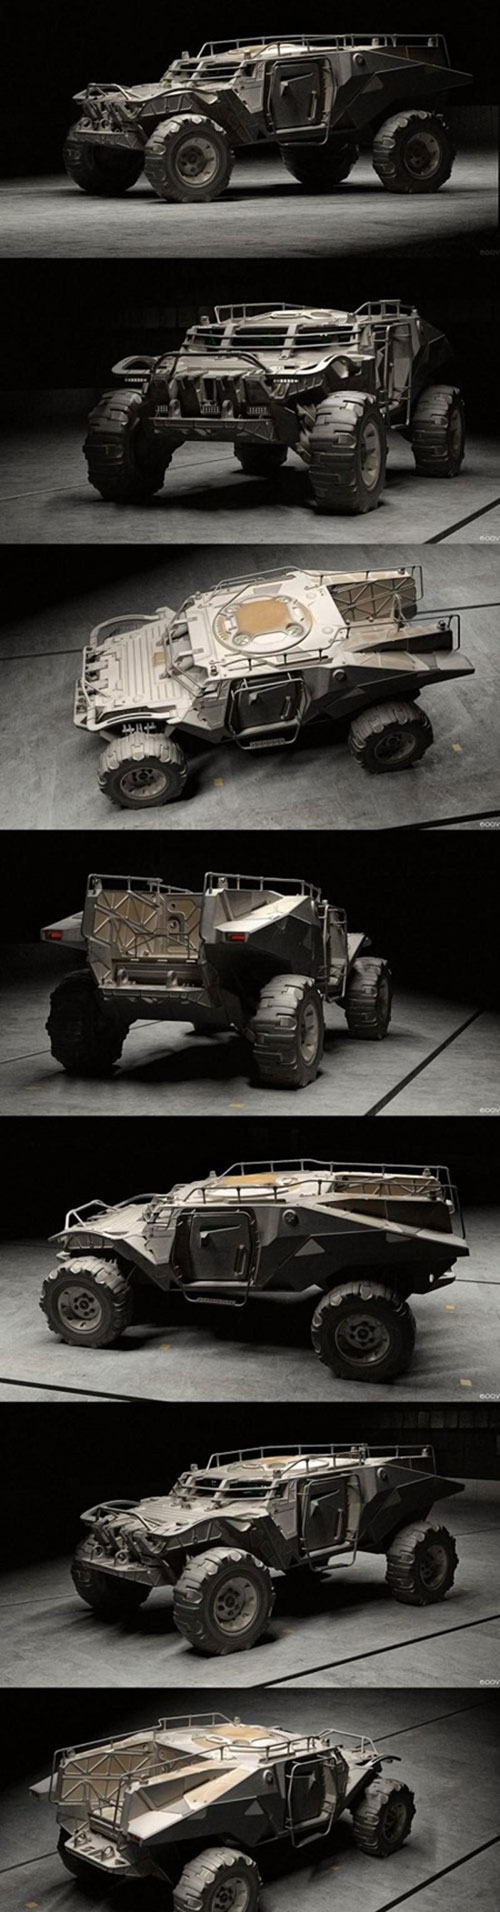 NOMAD 355 BRM Military Concept Vehicle 3D Model